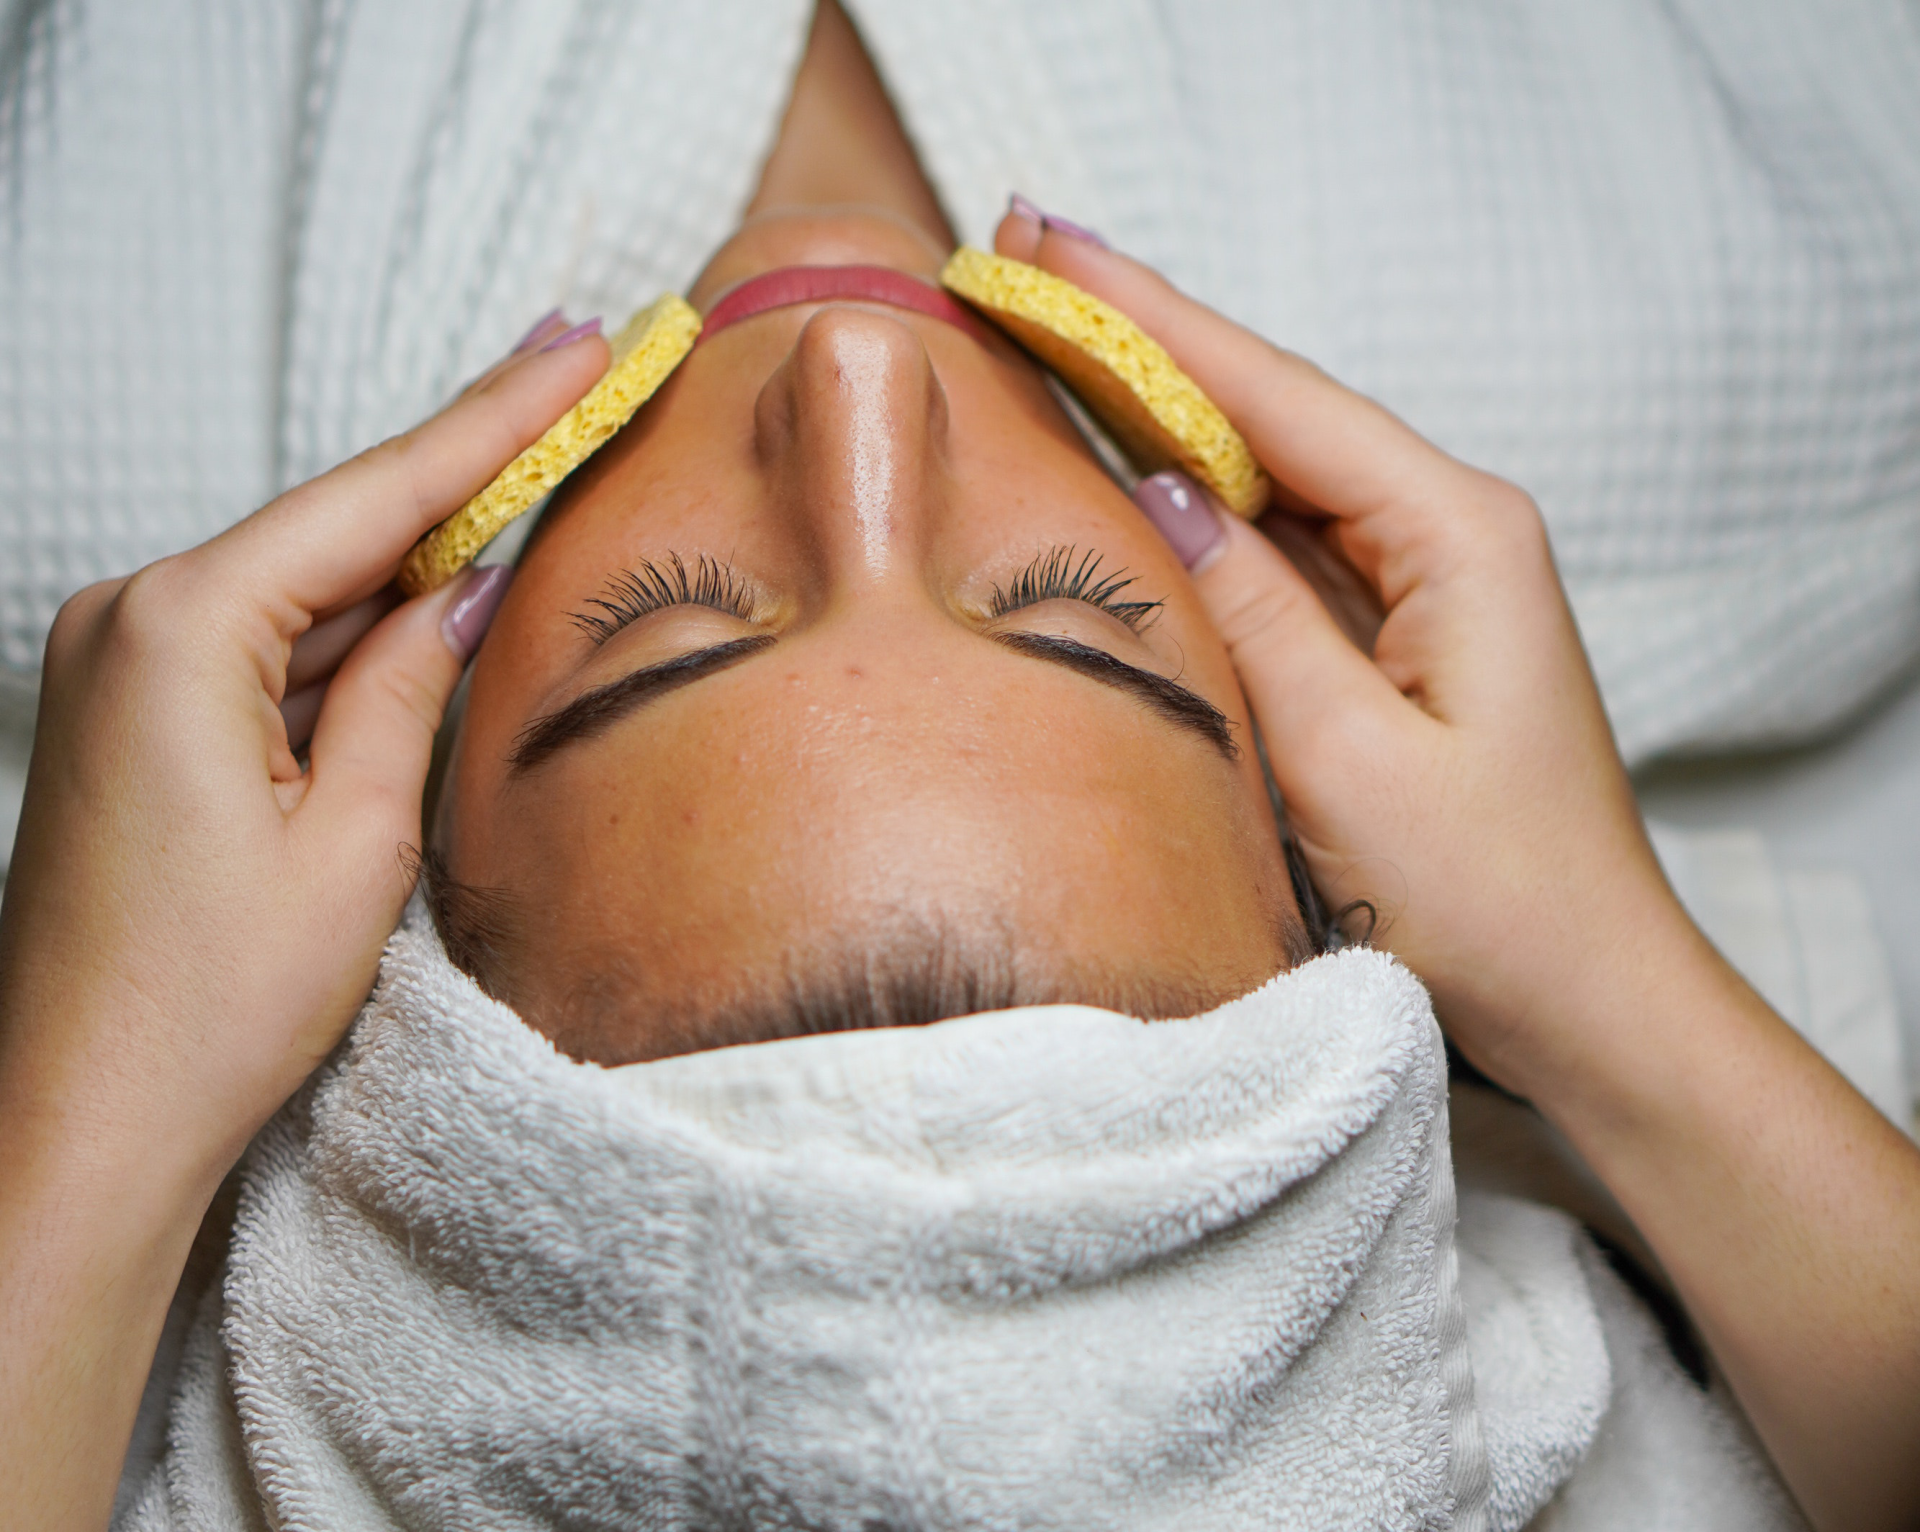 Tried and tested: The Exuviance Radiance Recovery Facial at Sorbet 1